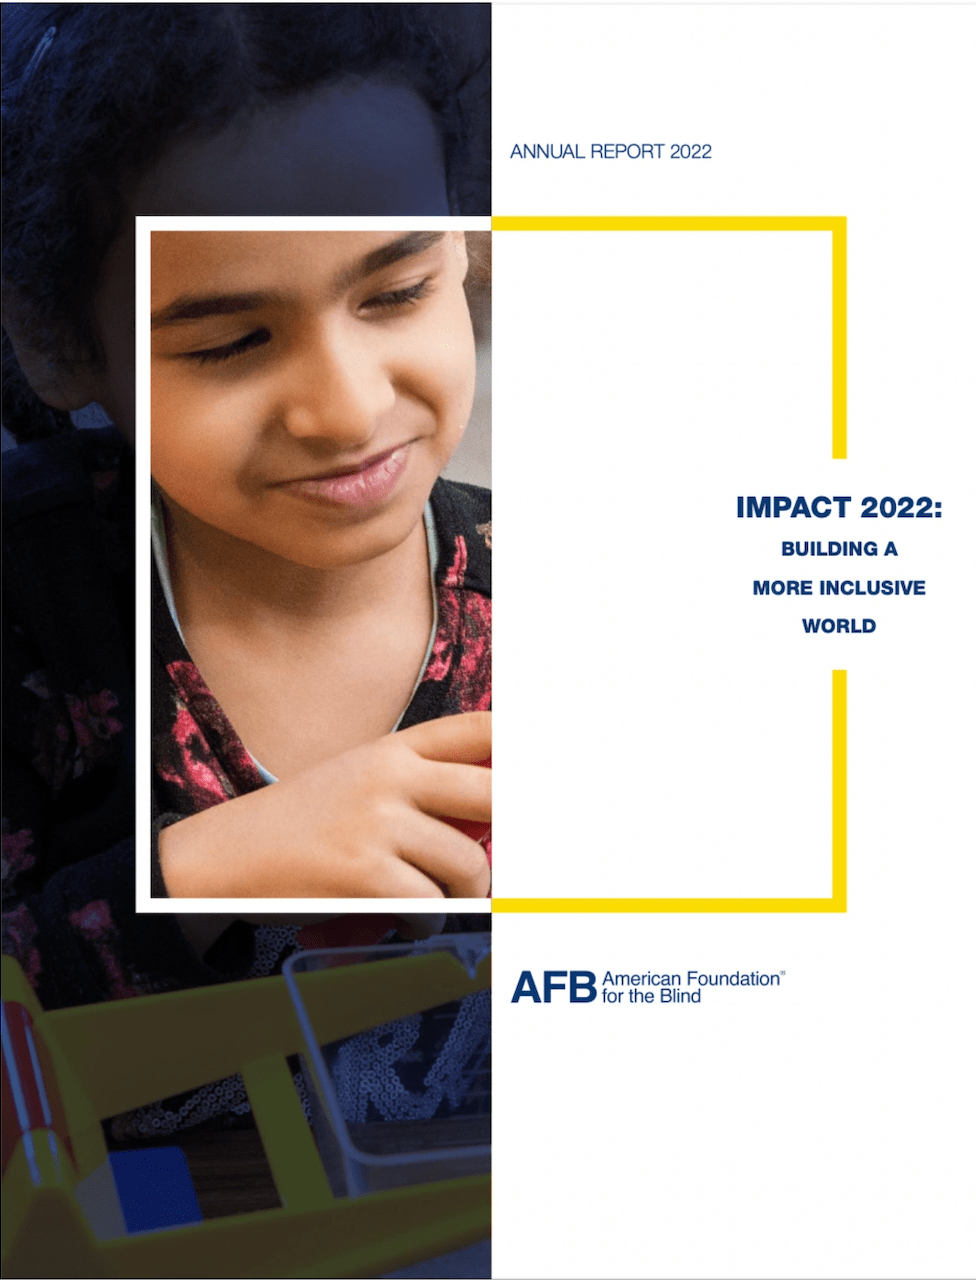 Impact 2022: Building a More Inclusive World. There is a young girl smiling within a square in the middle of the cover.